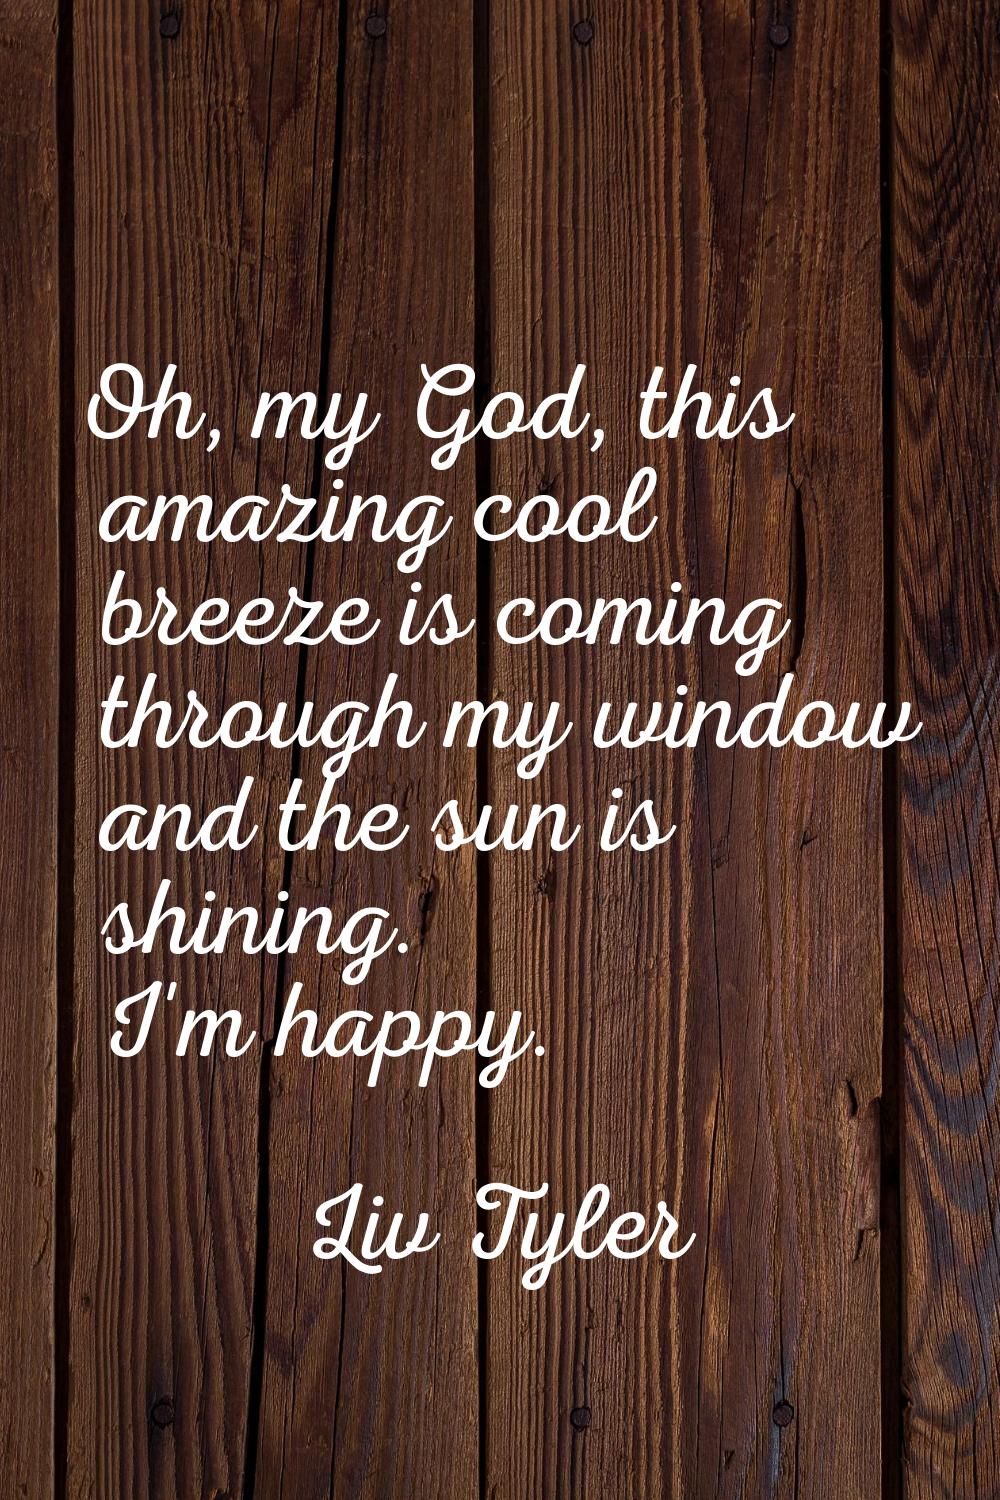 Oh, my God, this amazing cool breeze is coming through my window and the sun is shining. I'm happy.